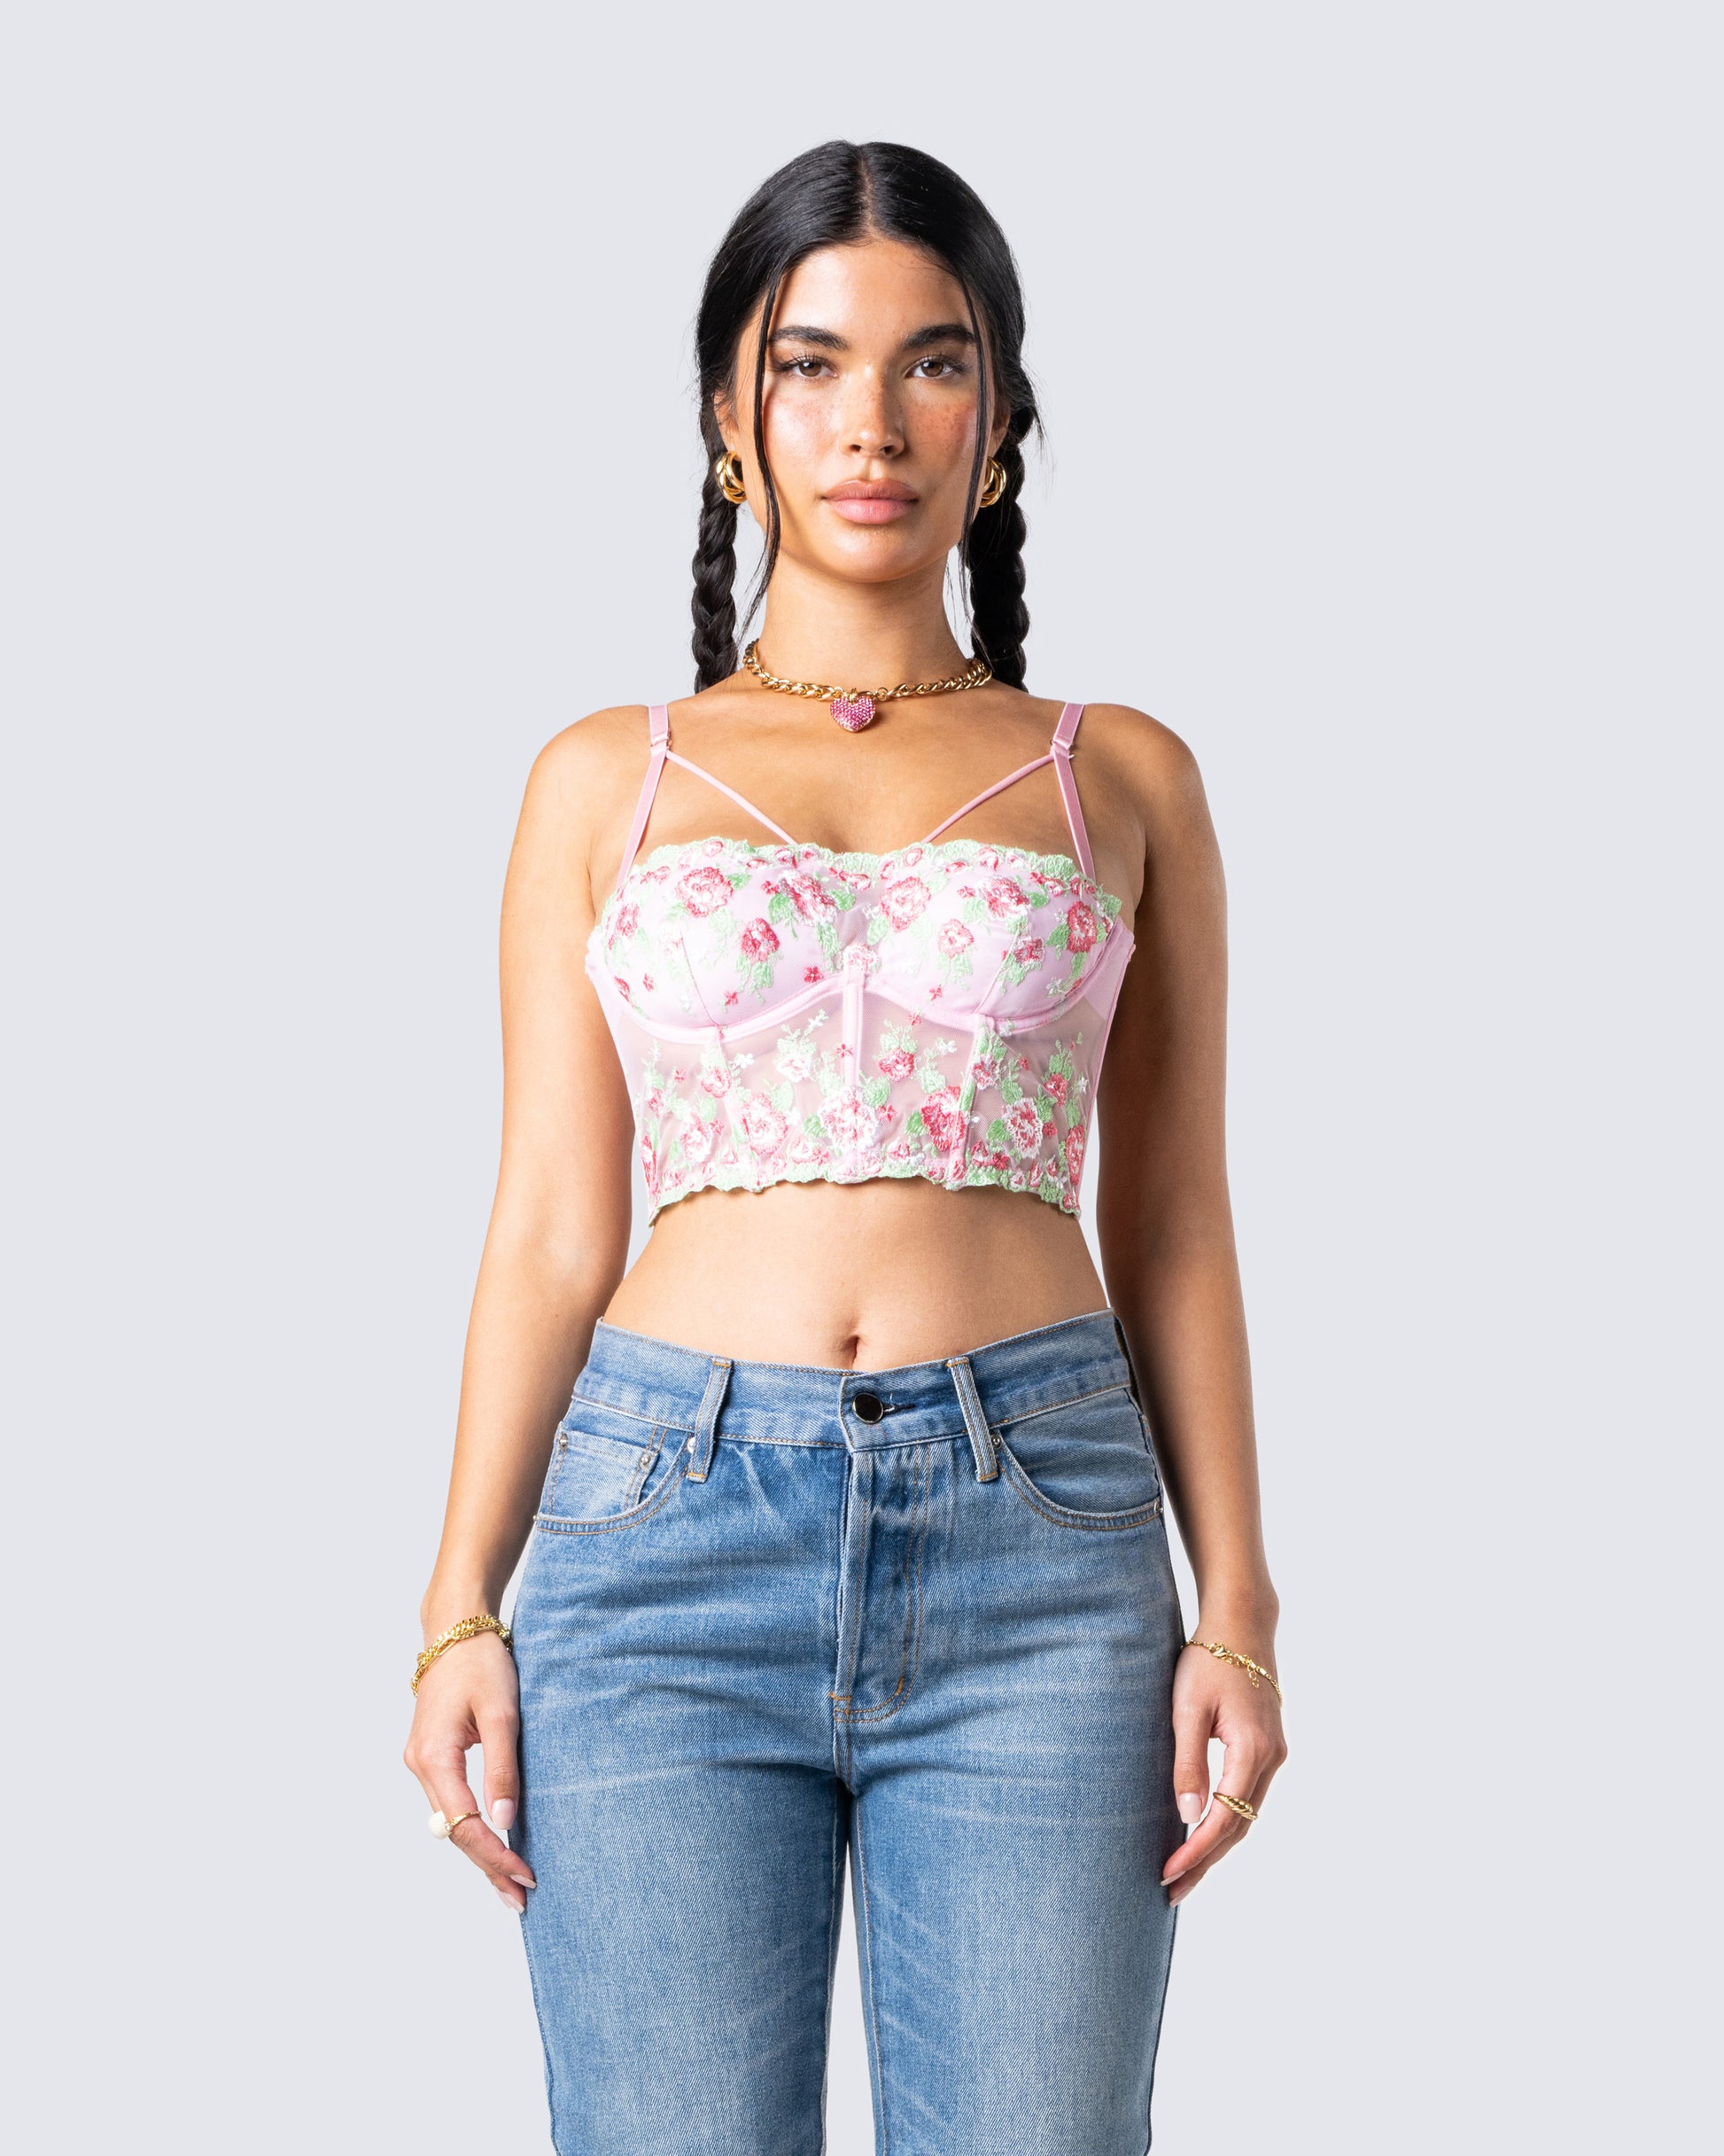 Stunning Floral Corset Top by Zara